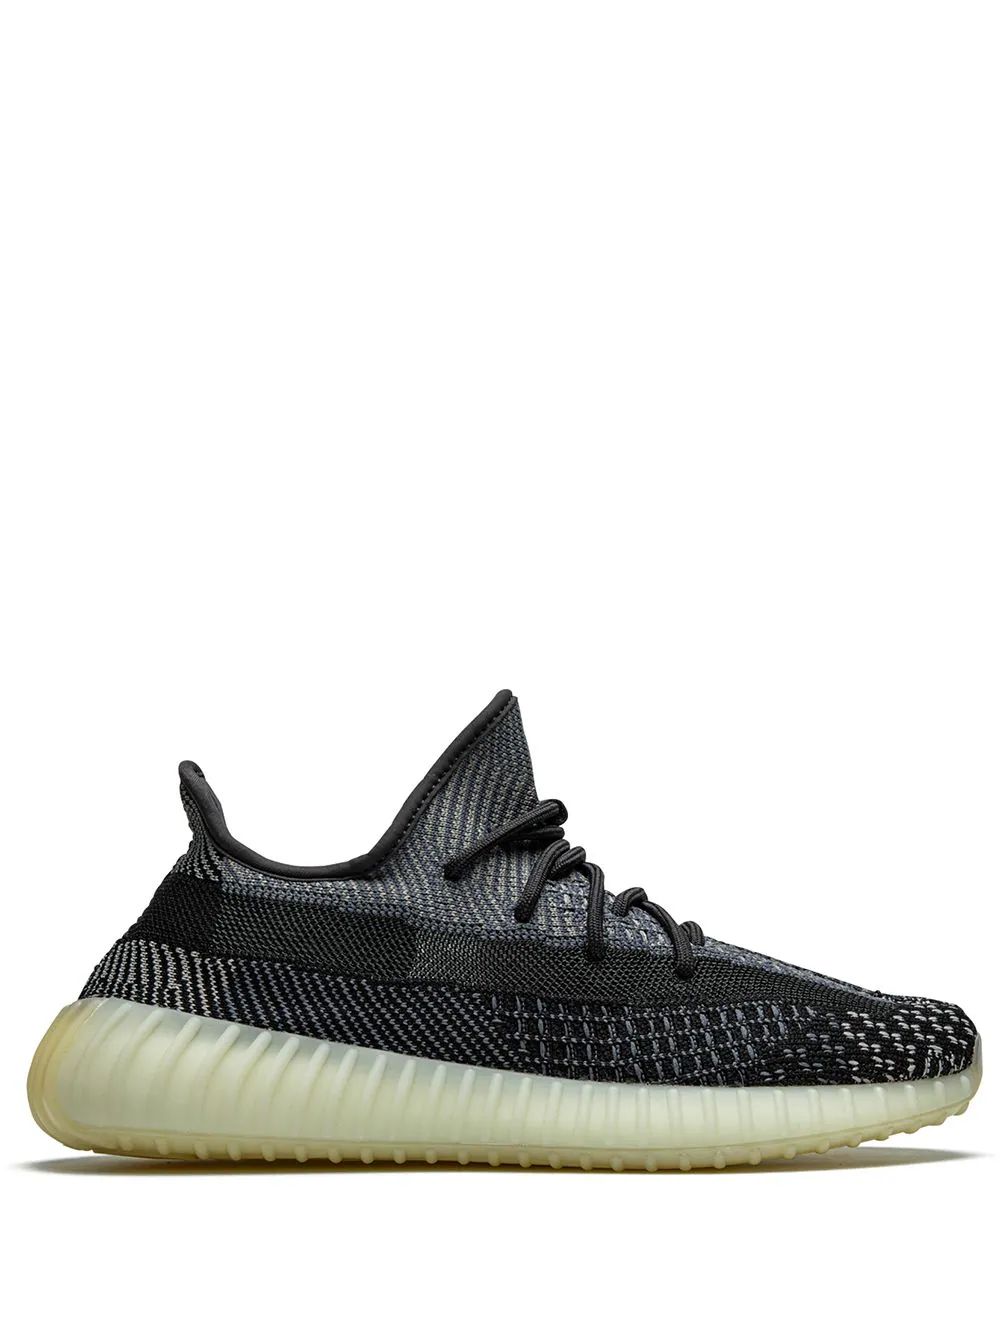 Yeezy Boost 350 V2 "Carbon" sneakers | Farfetch (US)